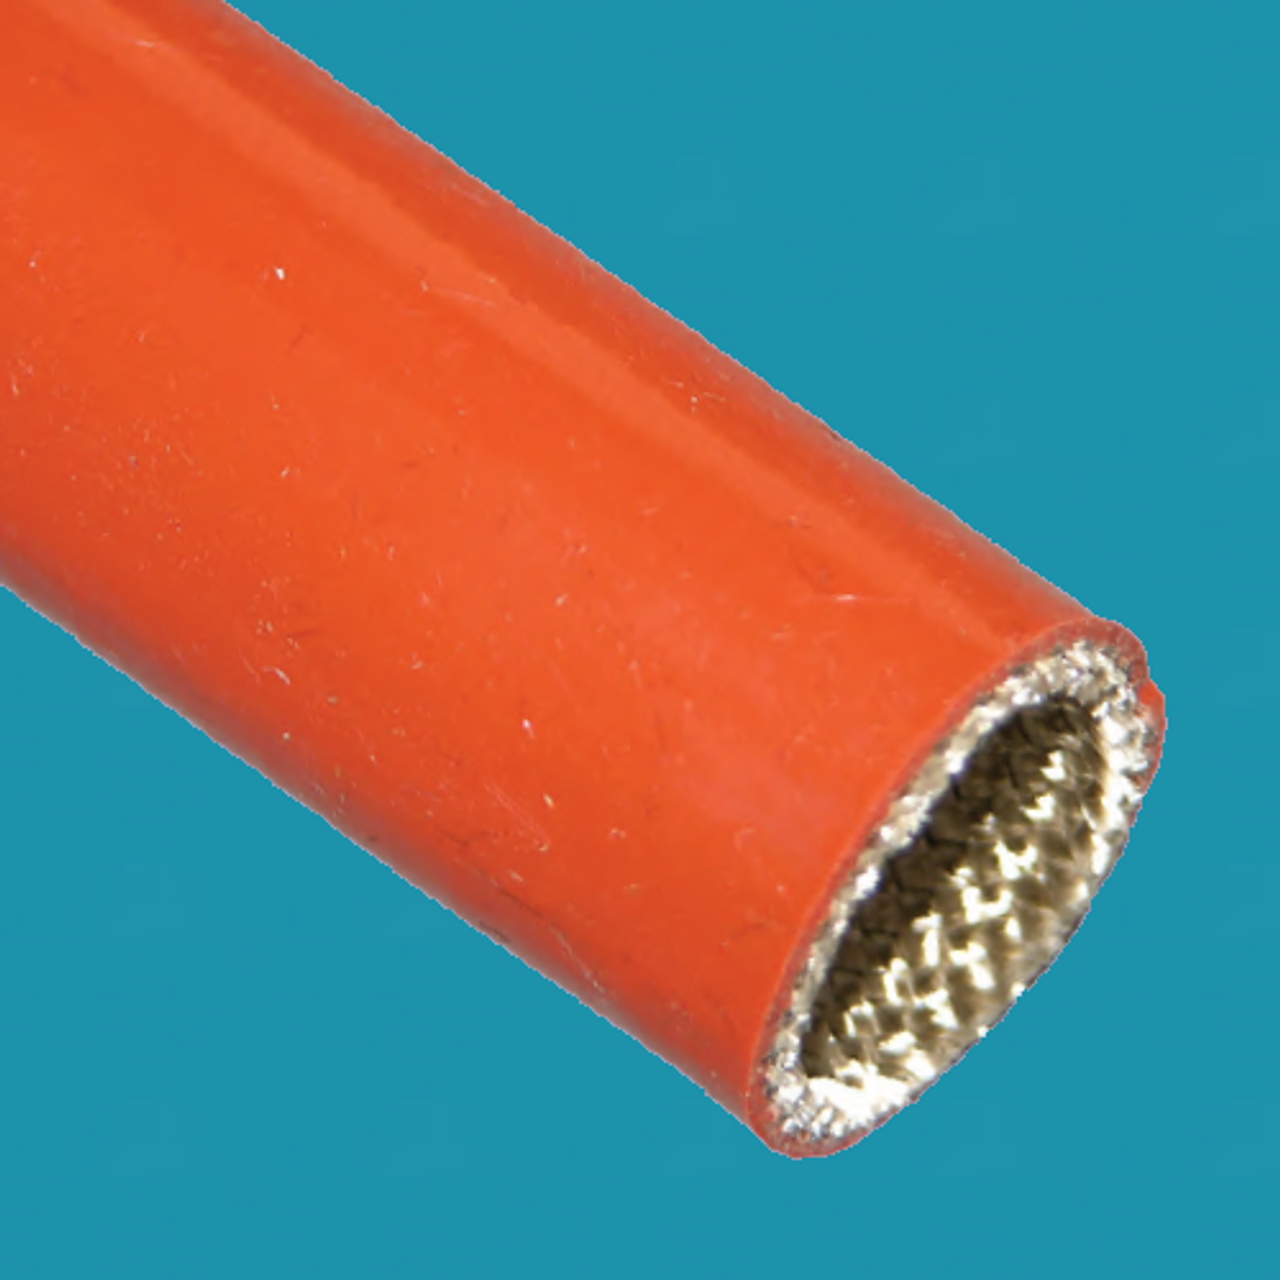 Electrical Insulation Sleeves